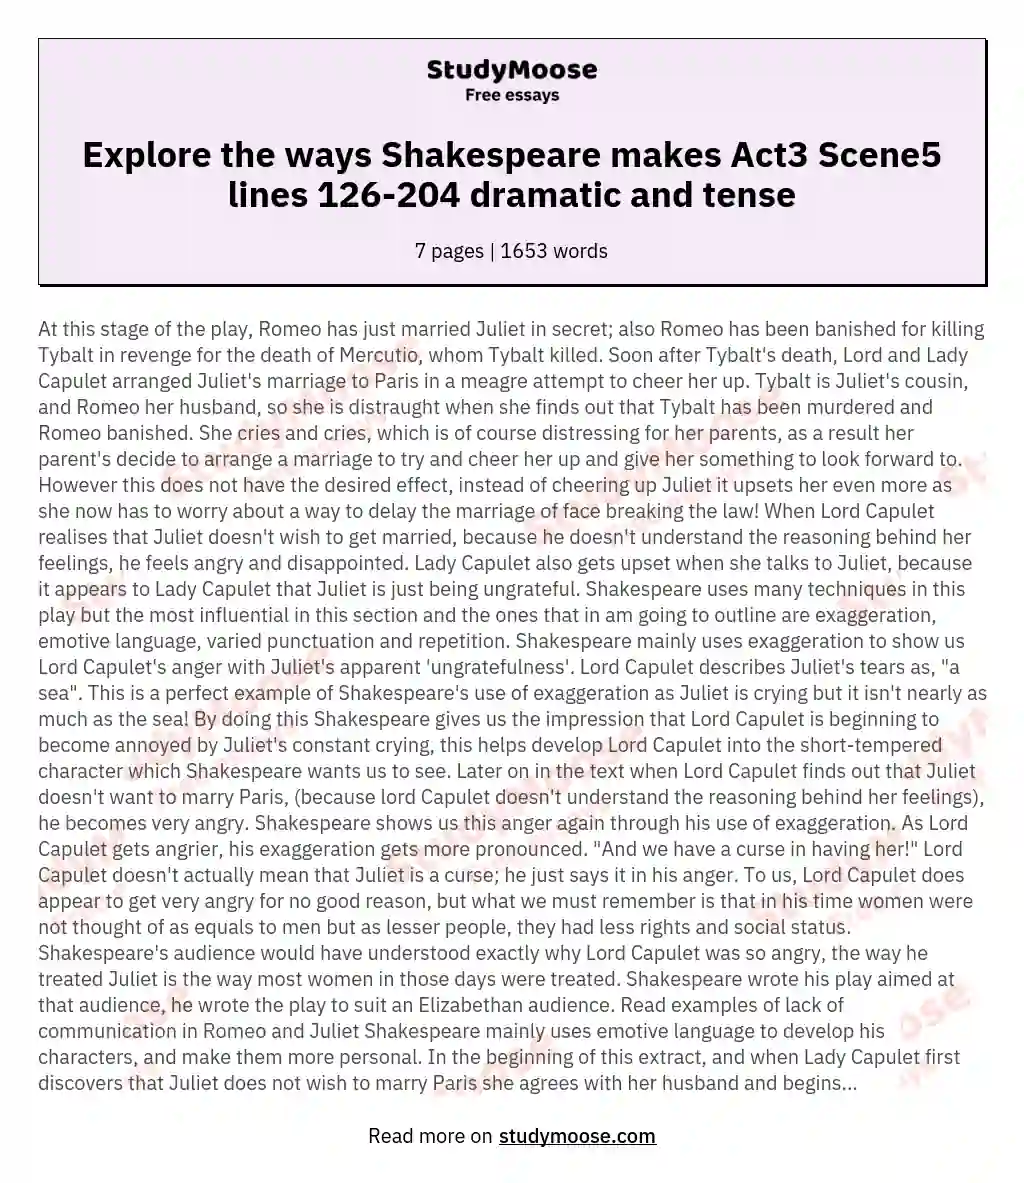 Explore the ways Shakespeare makes Act3 Scene5 lines 126-204 dramatic and tense essay